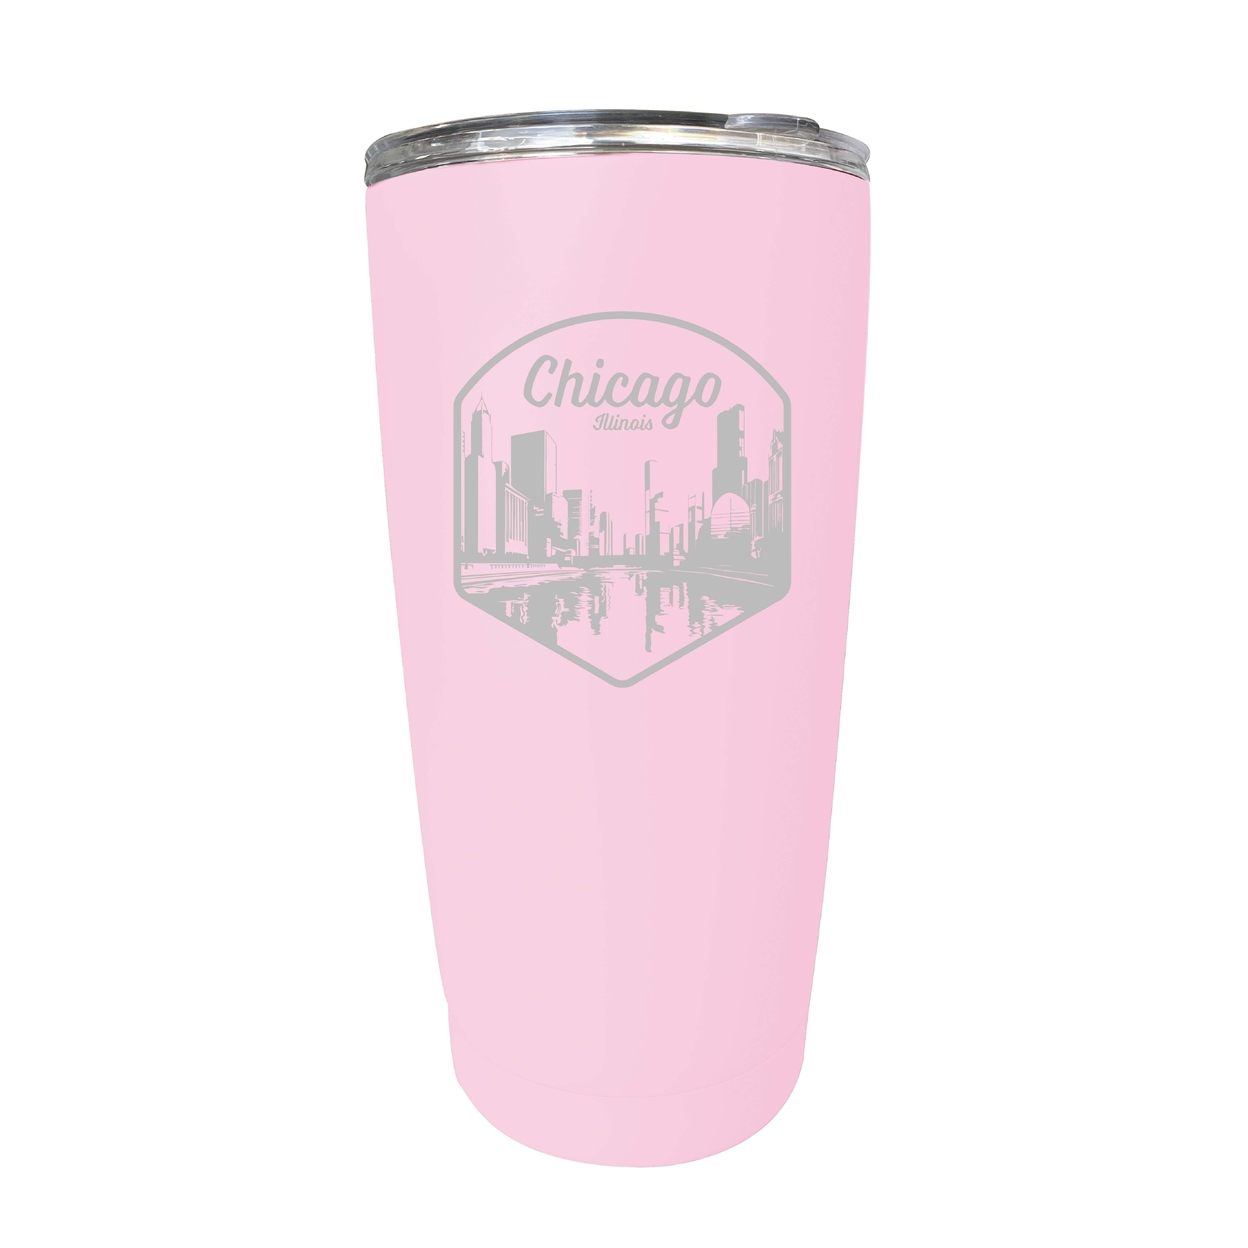 Chicago Illinois Souvenir 16 Oz Engraved Insulated Tumbler - Pink,,4-Pack